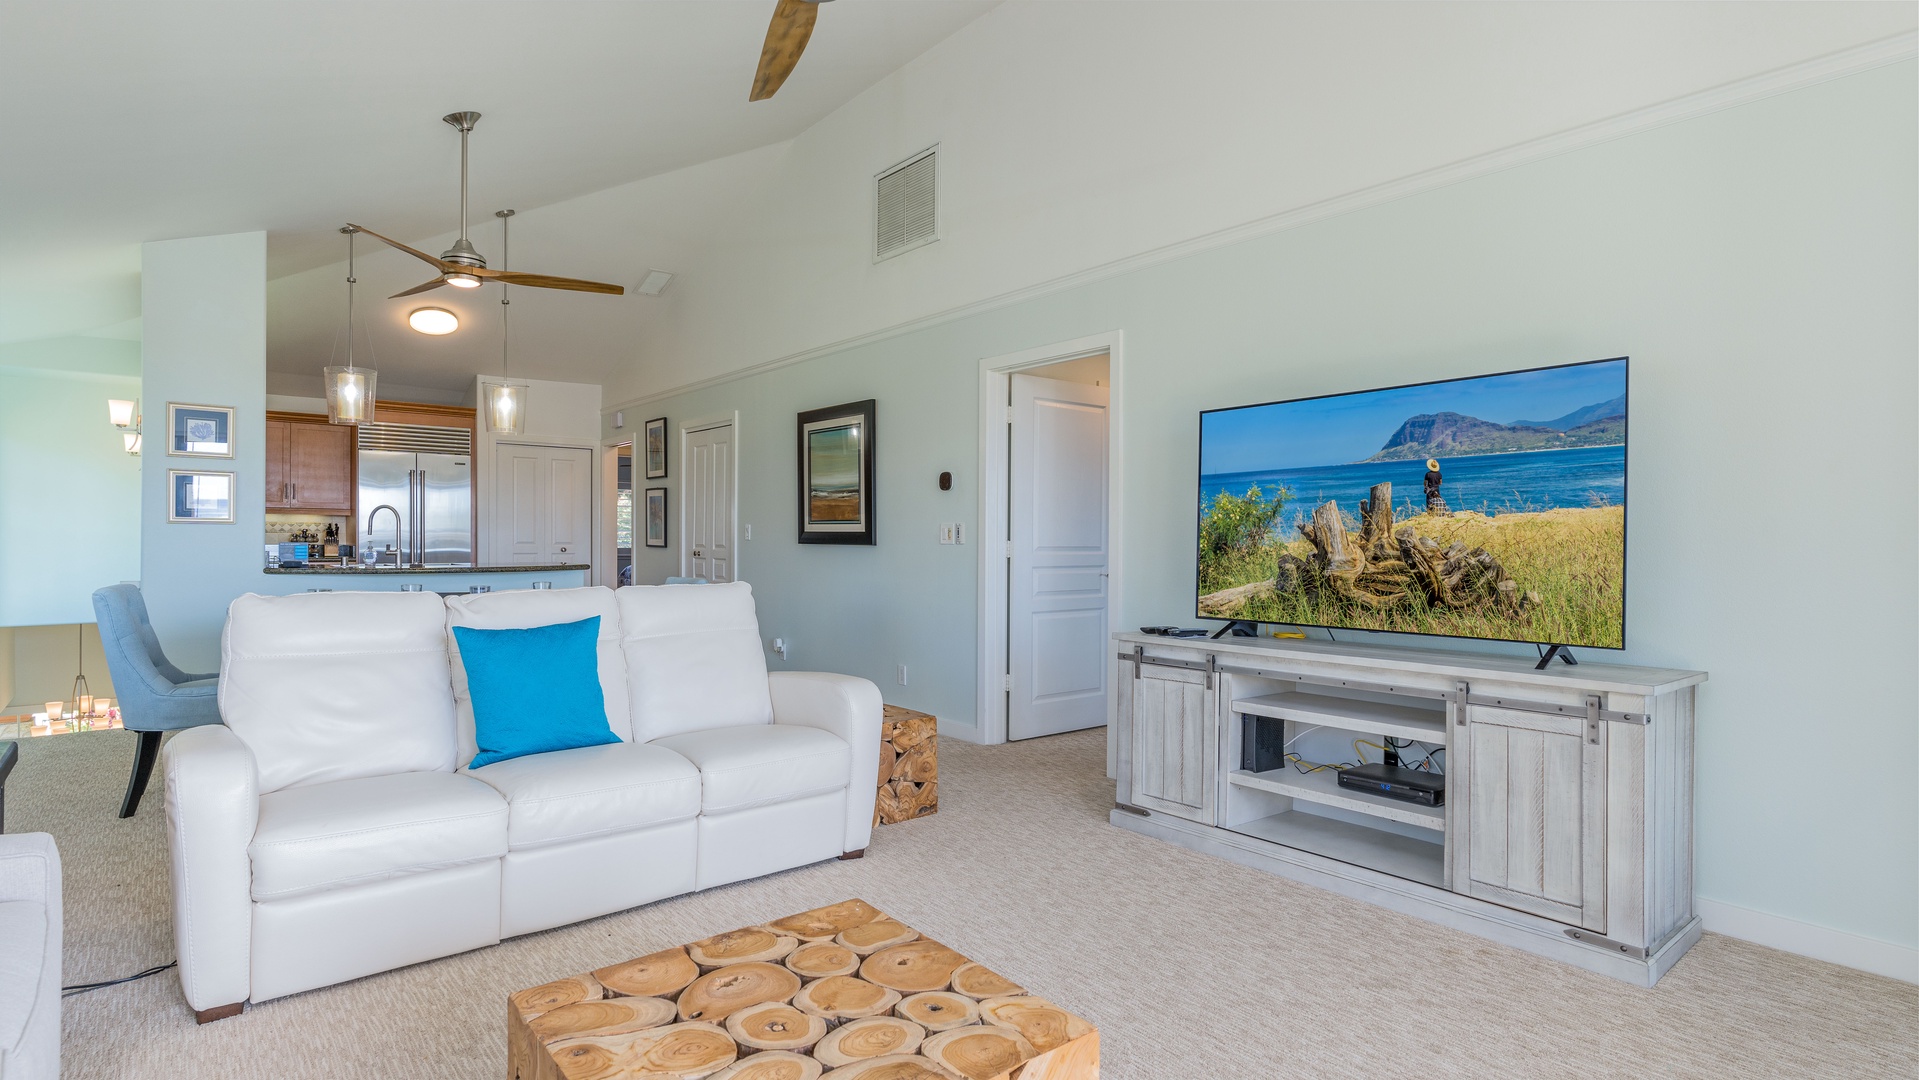 Kapolei Vacation Rentals, Kai Lani 21C - The open living area is comfortably appointed with natural lighting.